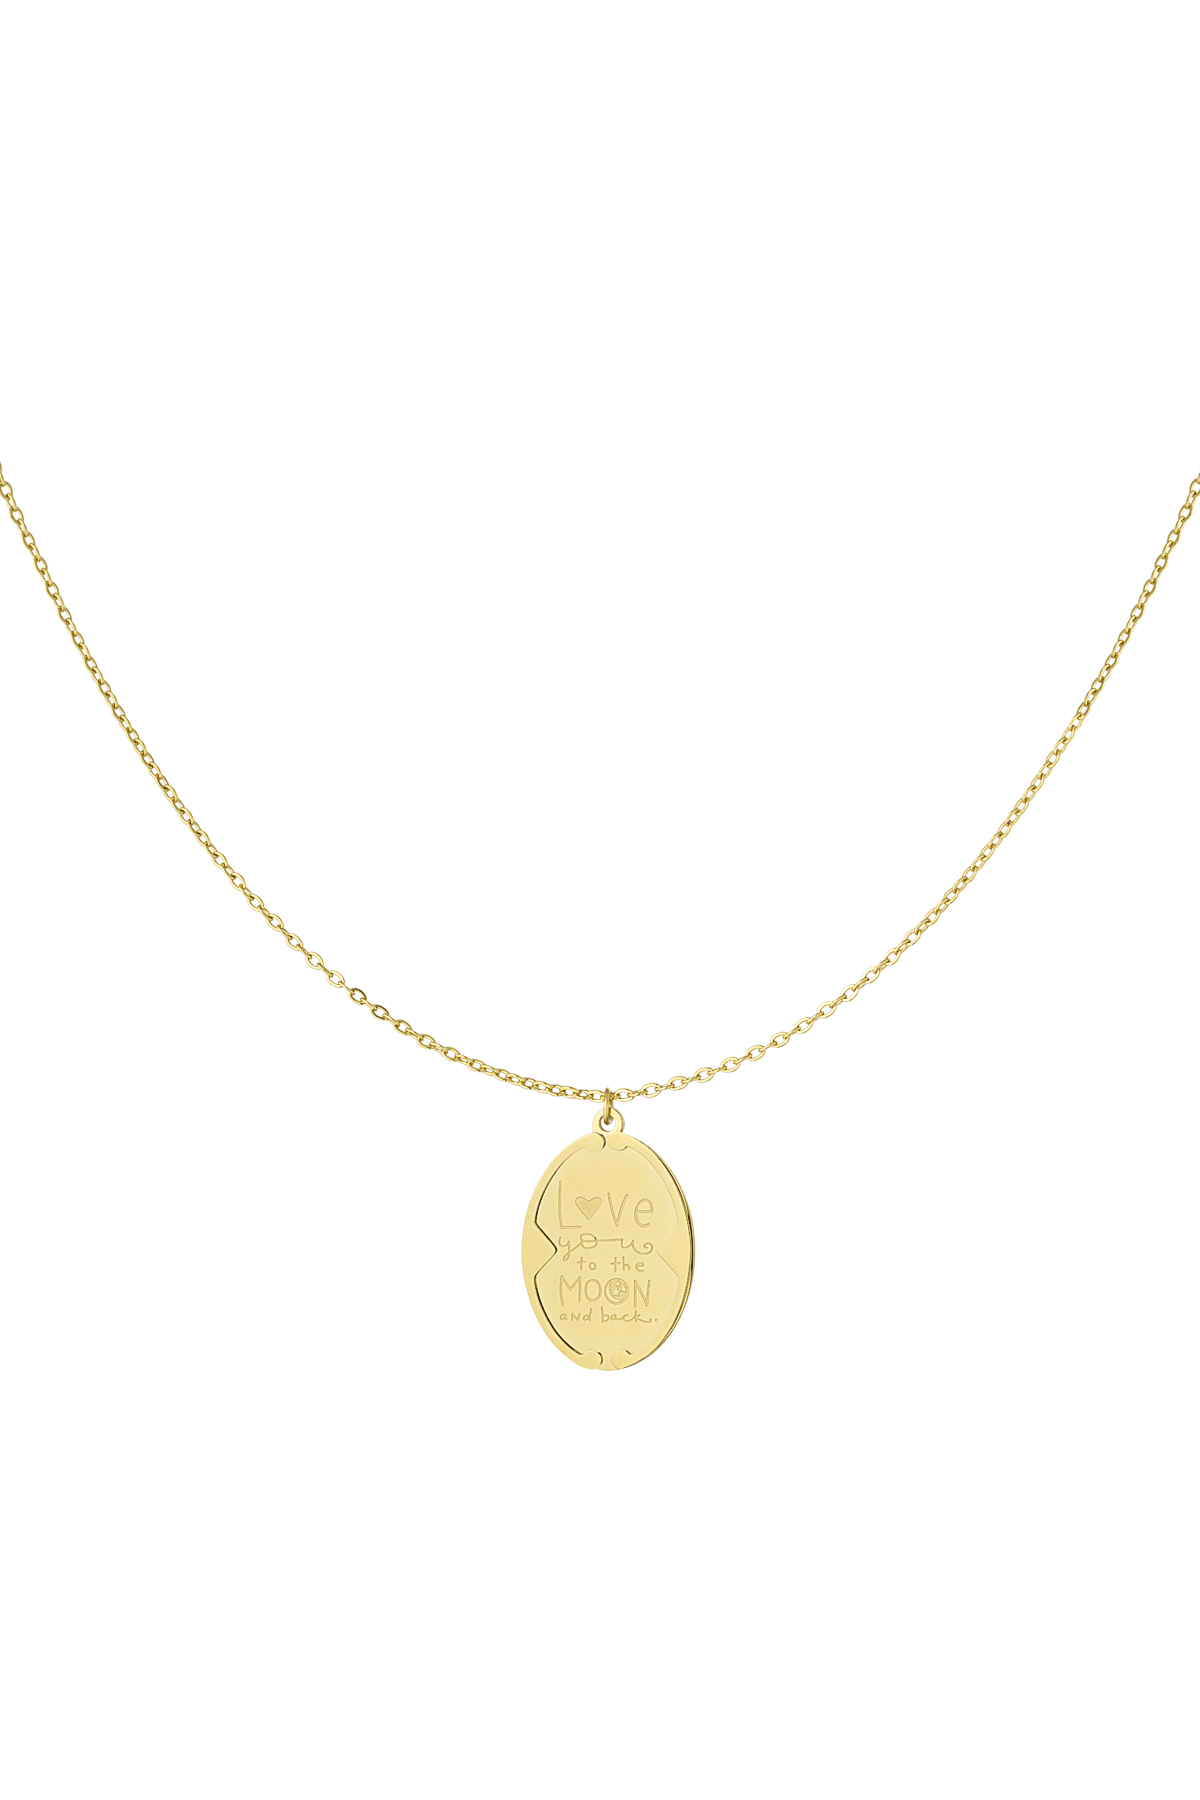 Love you to the moon and back ketting - goud 